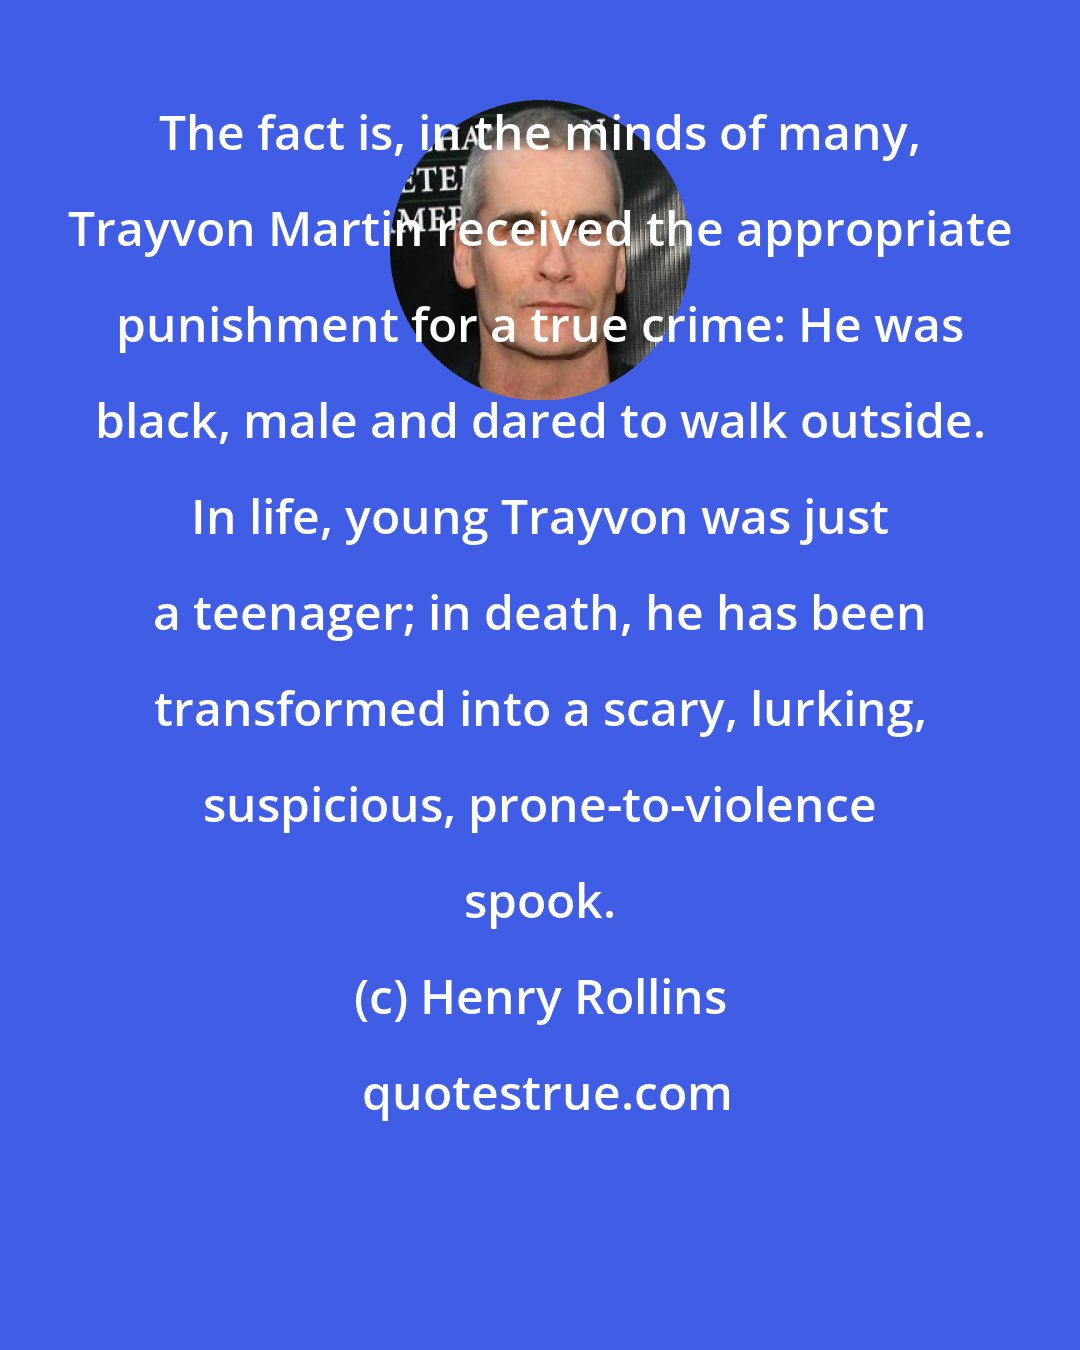 Henry Rollins: The fact is, in the minds of many, Trayvon Martin received the appropriate punishment for a true crime: He was black, male and dared to walk outside. In life, young Trayvon was just a teenager; in death, he has been transformed into a scary, lurking, suspicious, prone-to-violence spook.